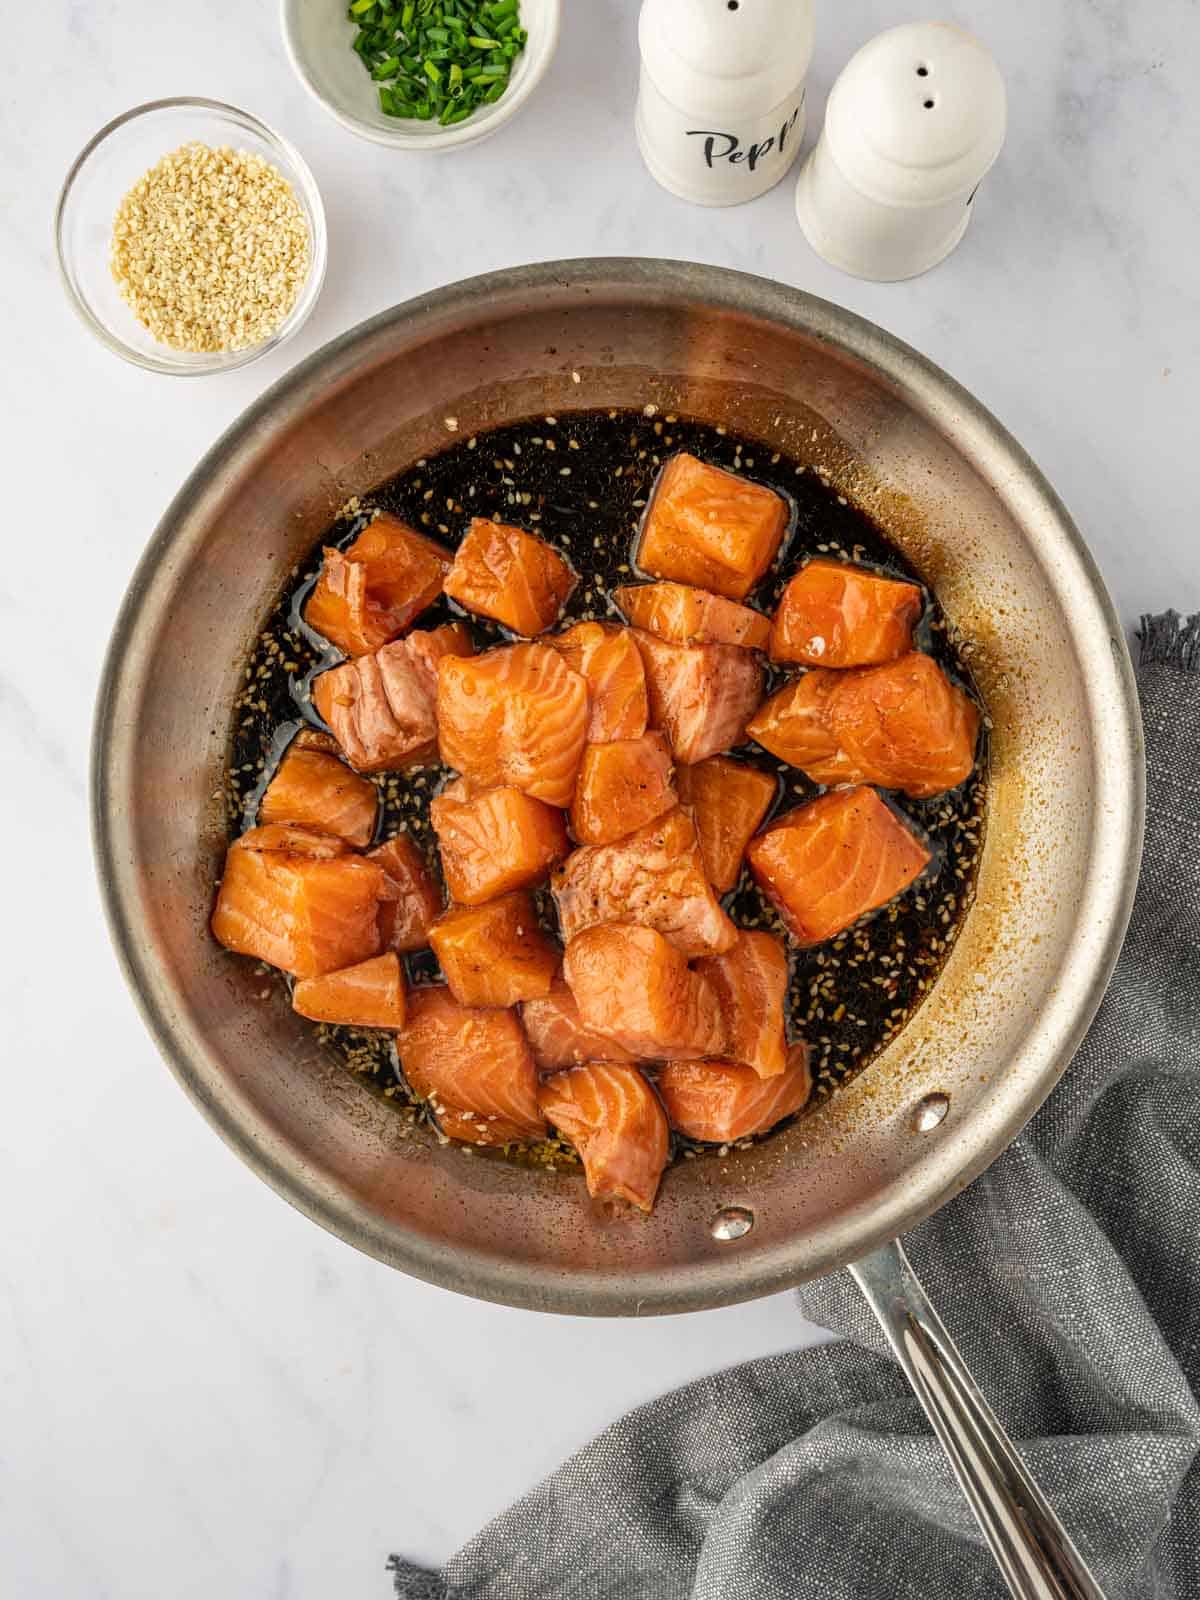 Marinated salmon cubes are cooked in a skillet.